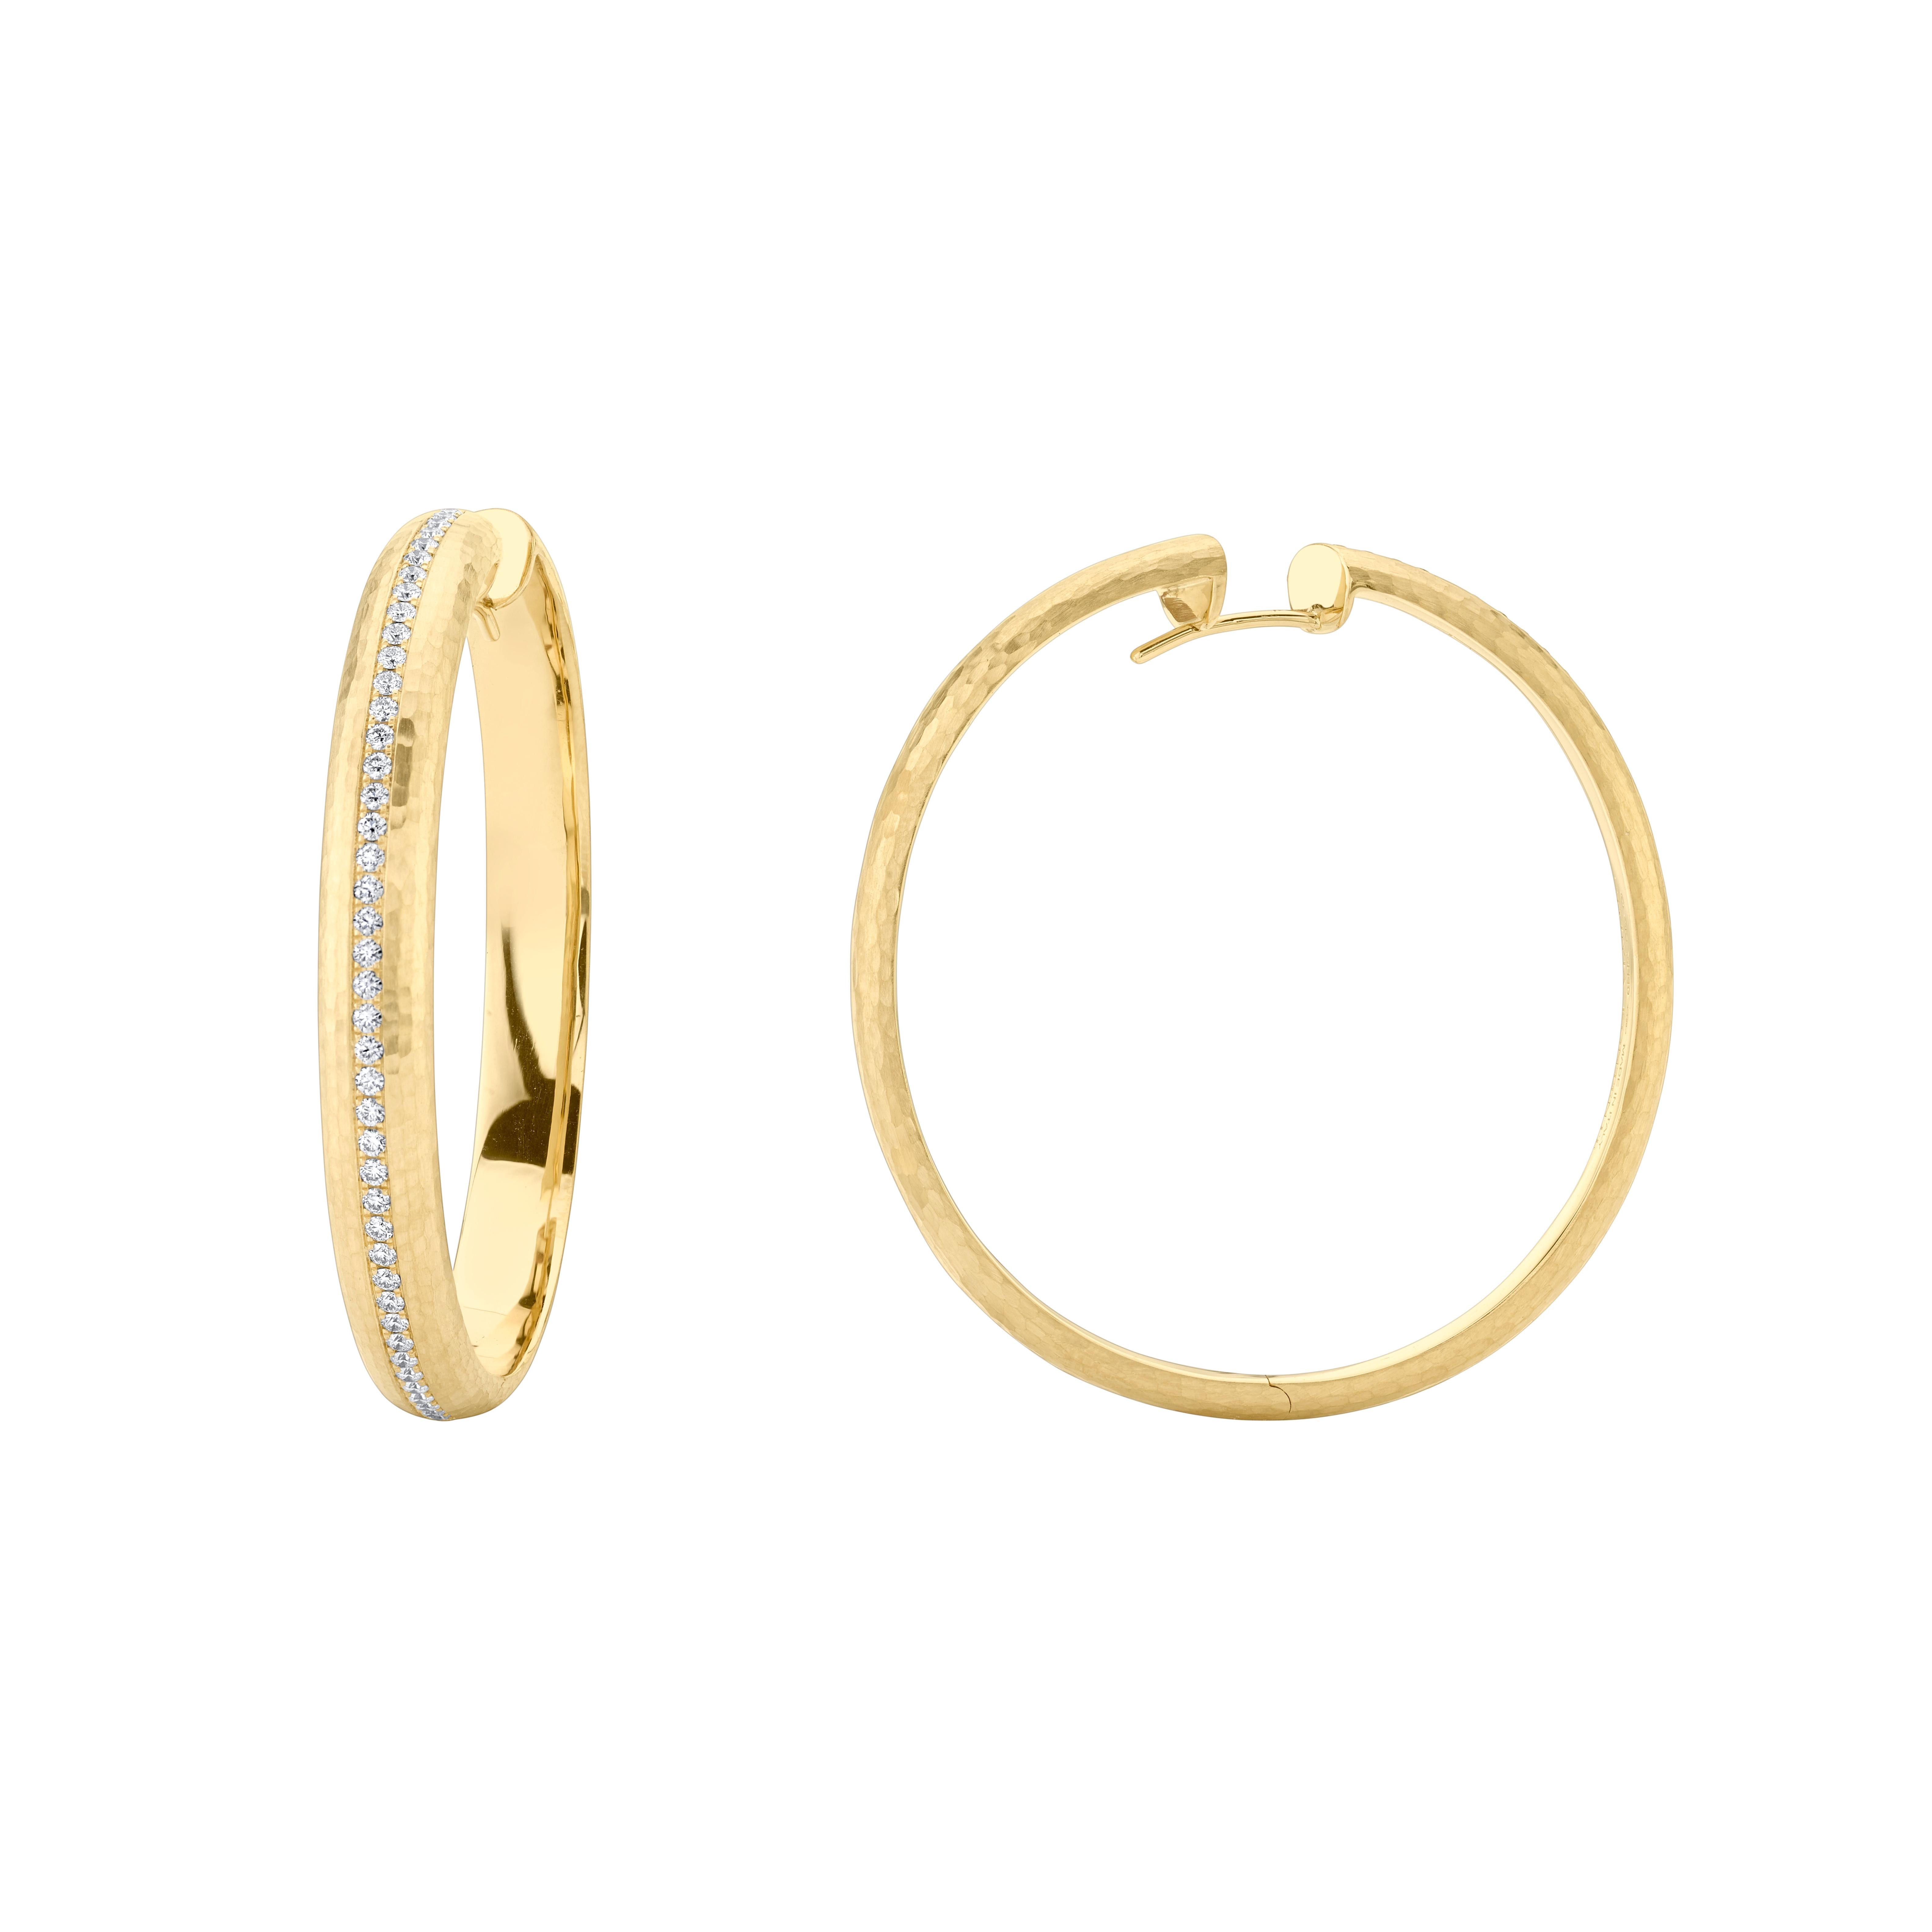 Style #: XH40H.
SYLVIA KONTENTE  18K Yellow gold diamond hoop earrings with hammered finish.
Precision-cut, round brilliant diamonds.
Diamond total weight: 0.79ct tw.
Diamond color/clarity: DEF/VVS VS.
Hammered finish.
High-end construction.
Size: